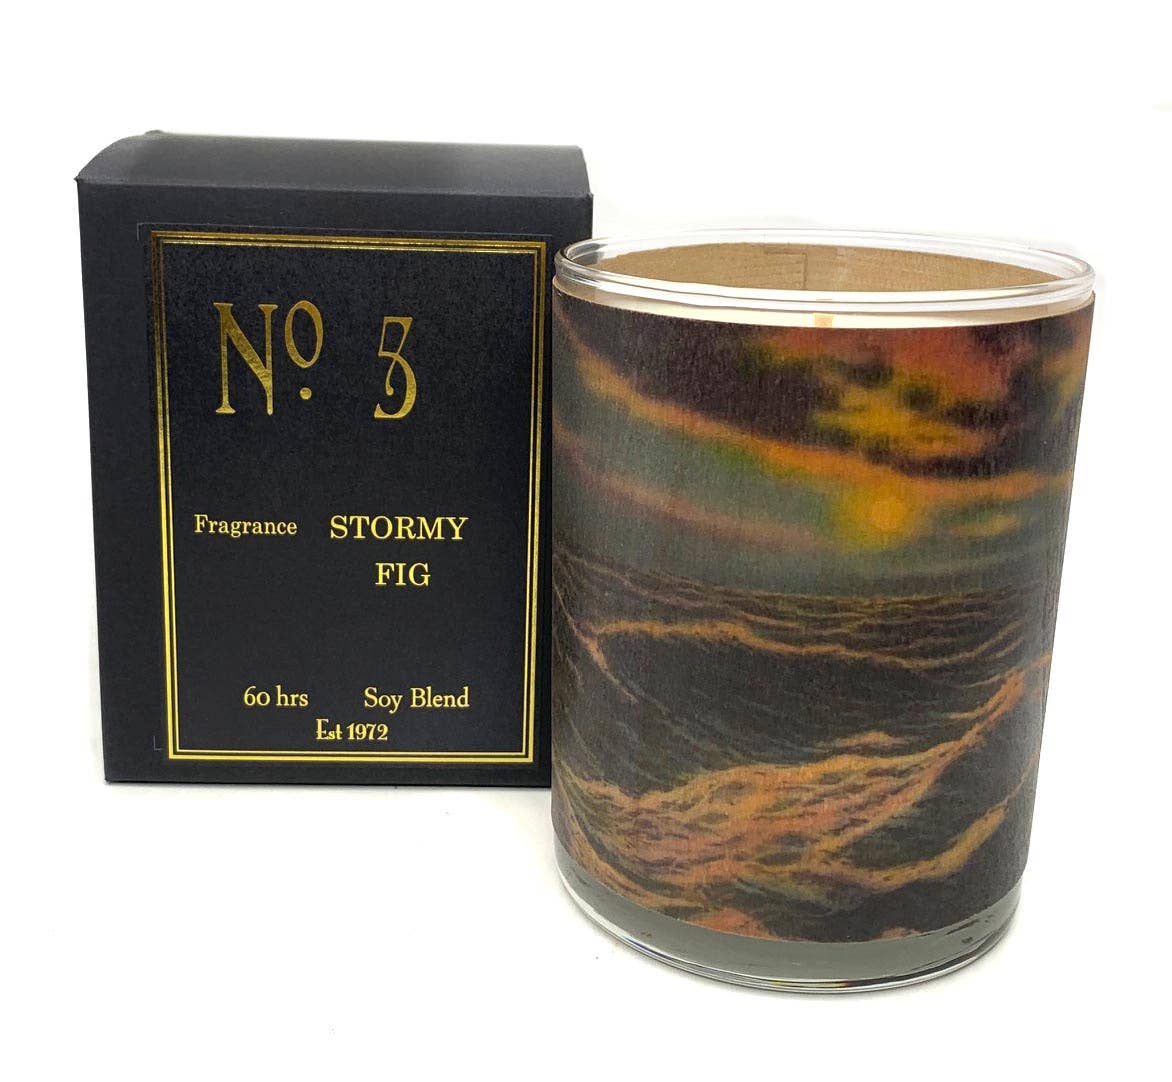 No 5 Stormy Black Fig Candle